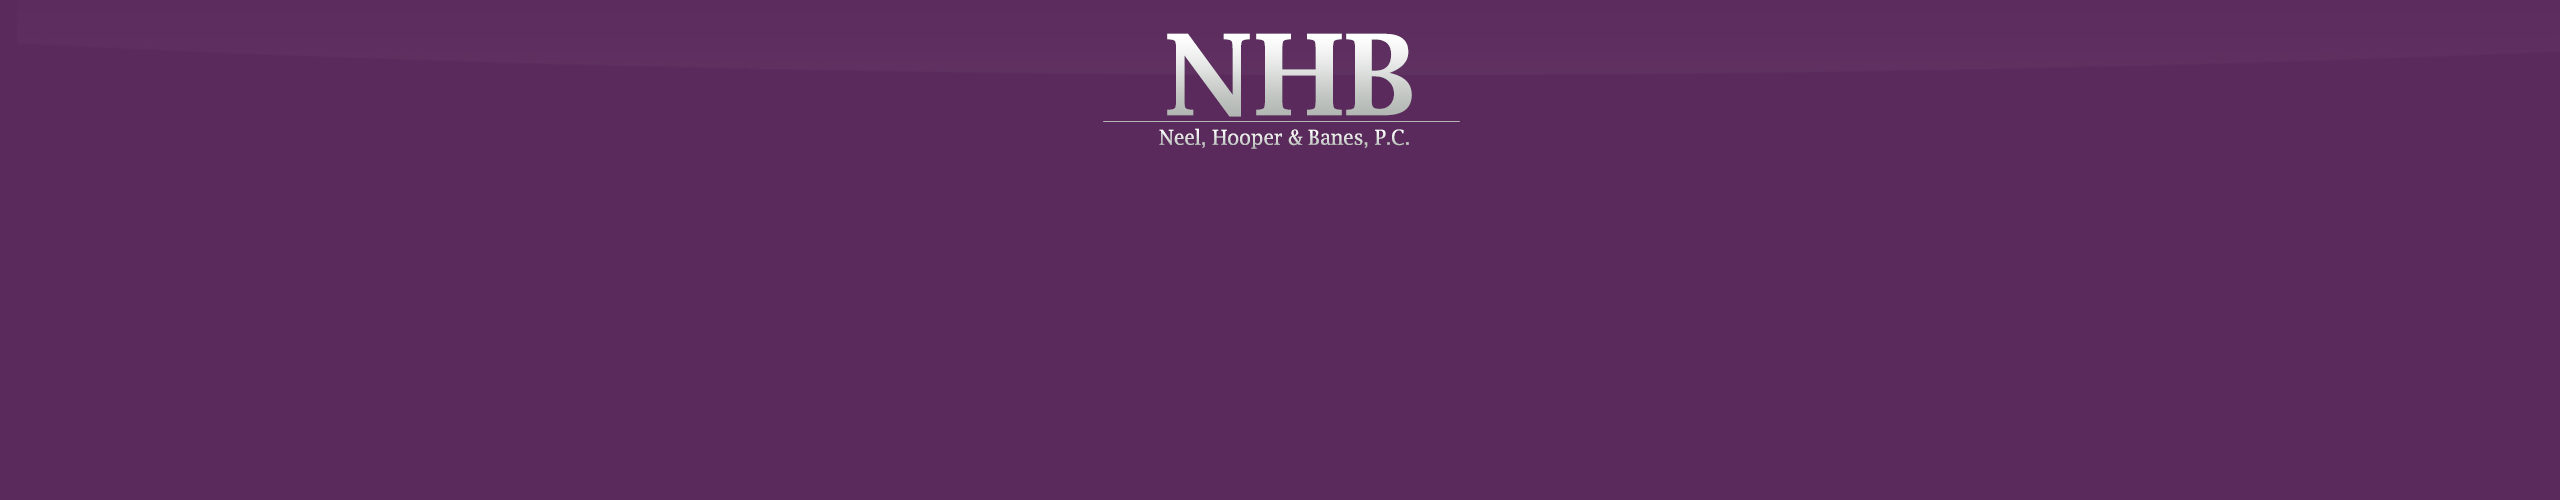 The labor and employment lawyers at Neel, Hooper & Banes, P.C. counsel and advise Texas employers on compliance issues for federal, state and local employment laws.